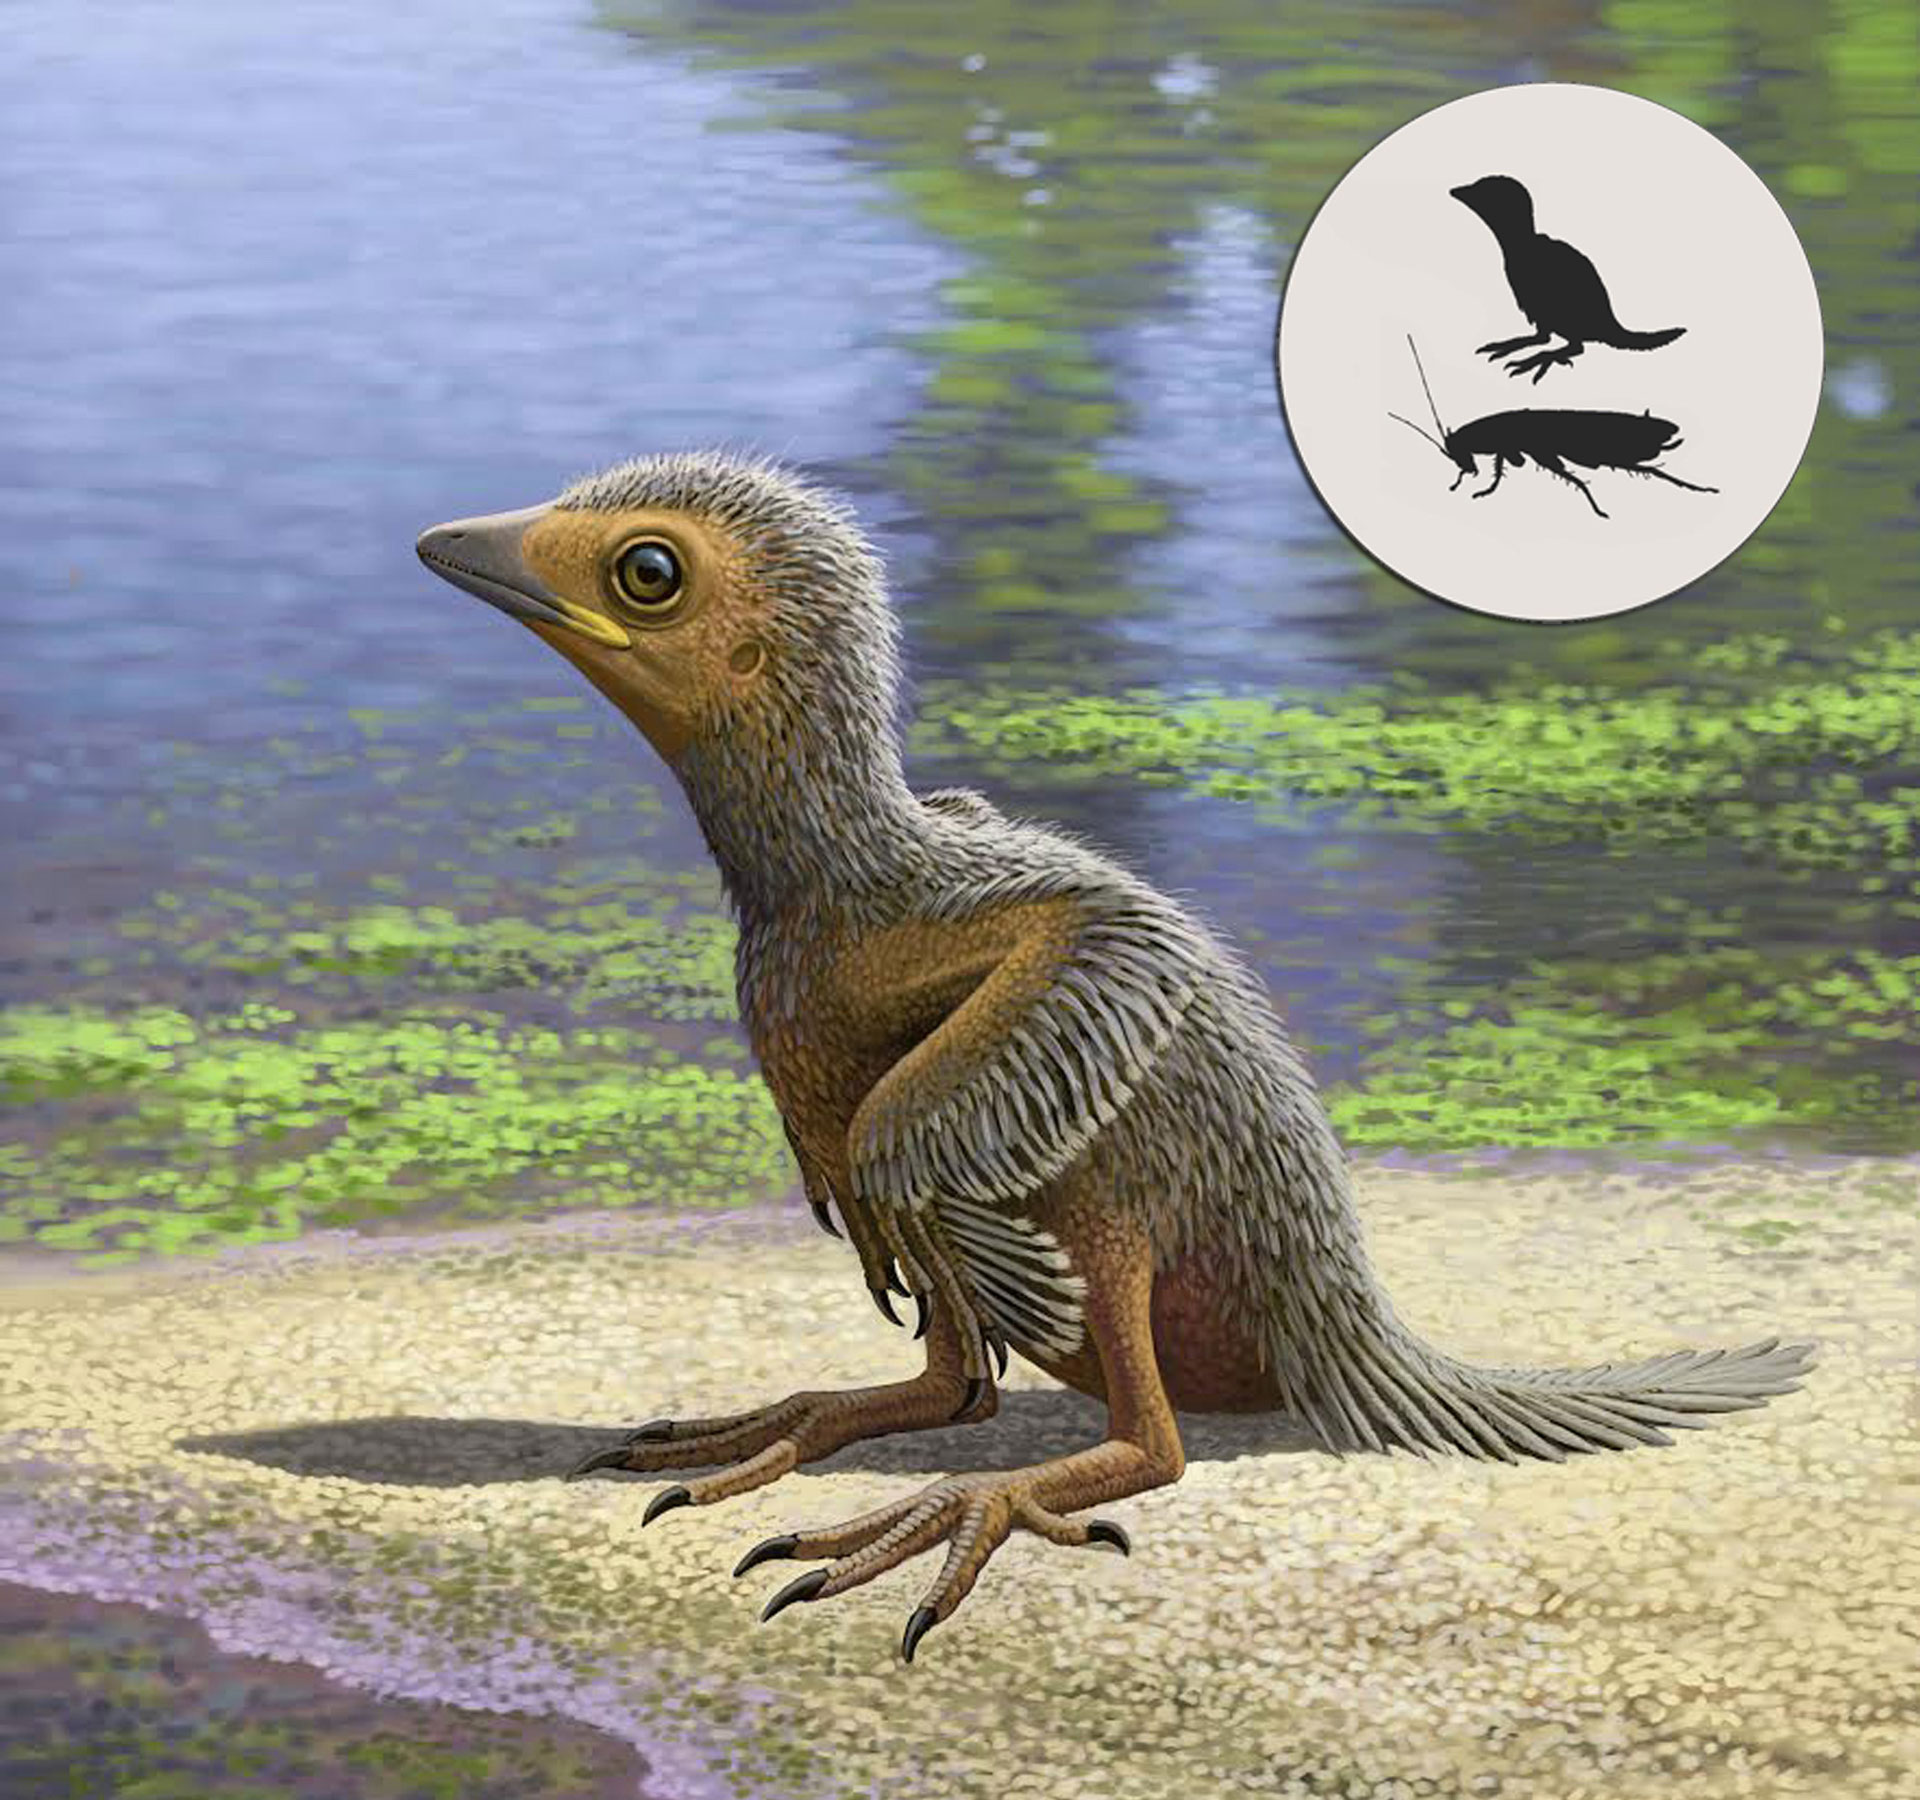 Newly Discovered Prehistoric Bird Fossil Sheds Light on Avian Evolution